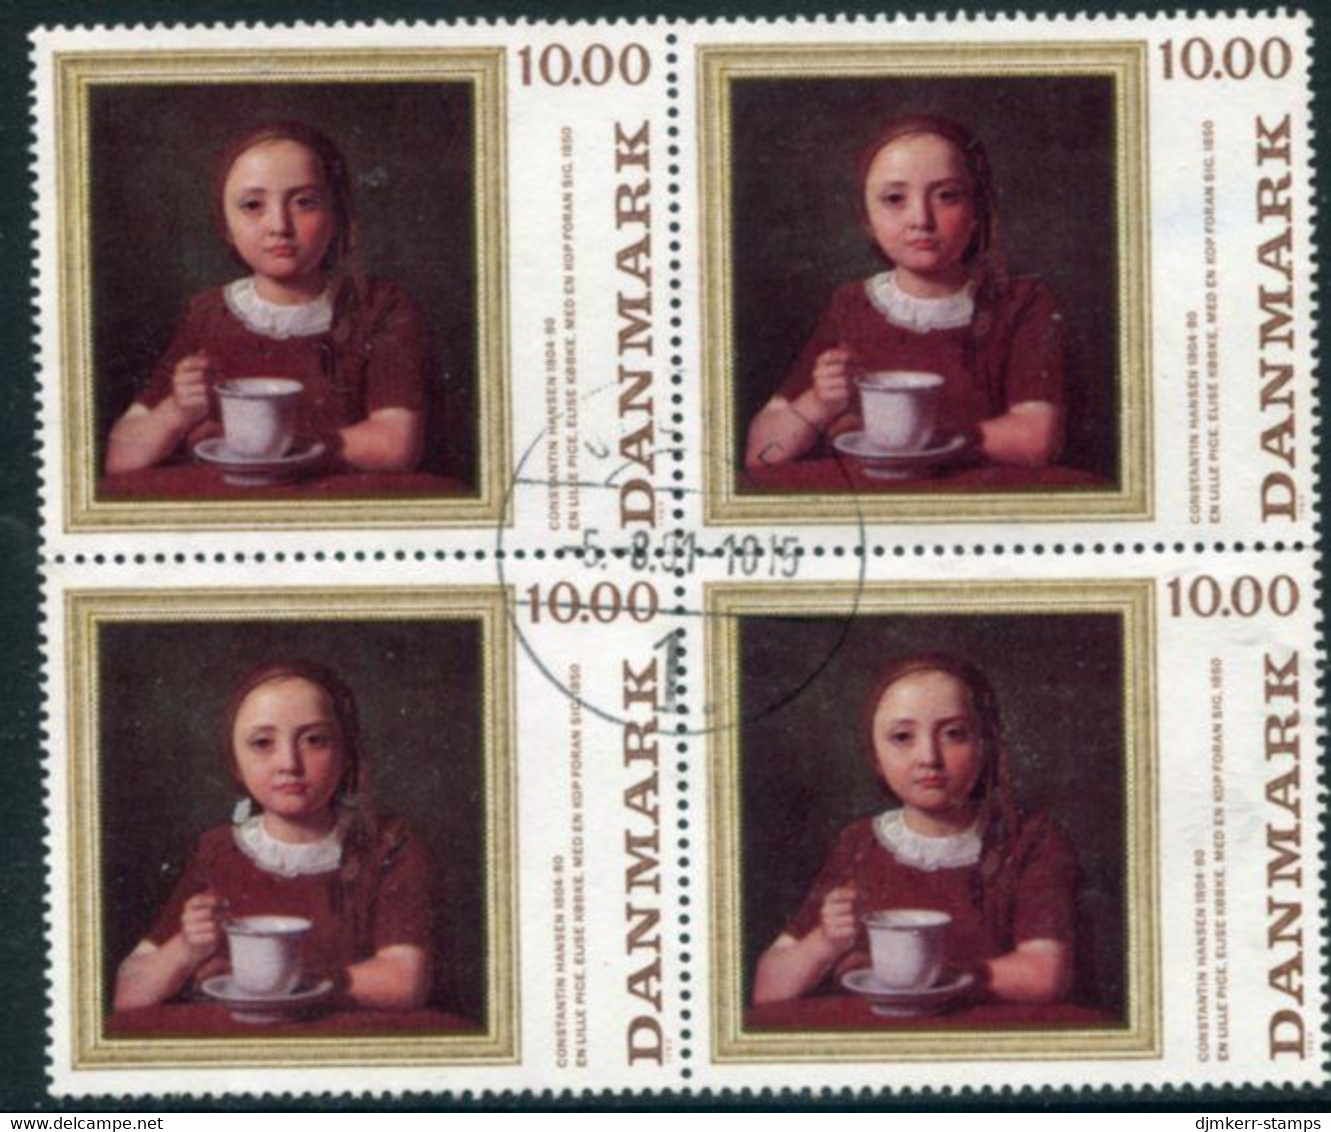 DENMARK 1989 Painting 10.00 Kr Block Of 4 Used..   Michel 962 - Used Stamps